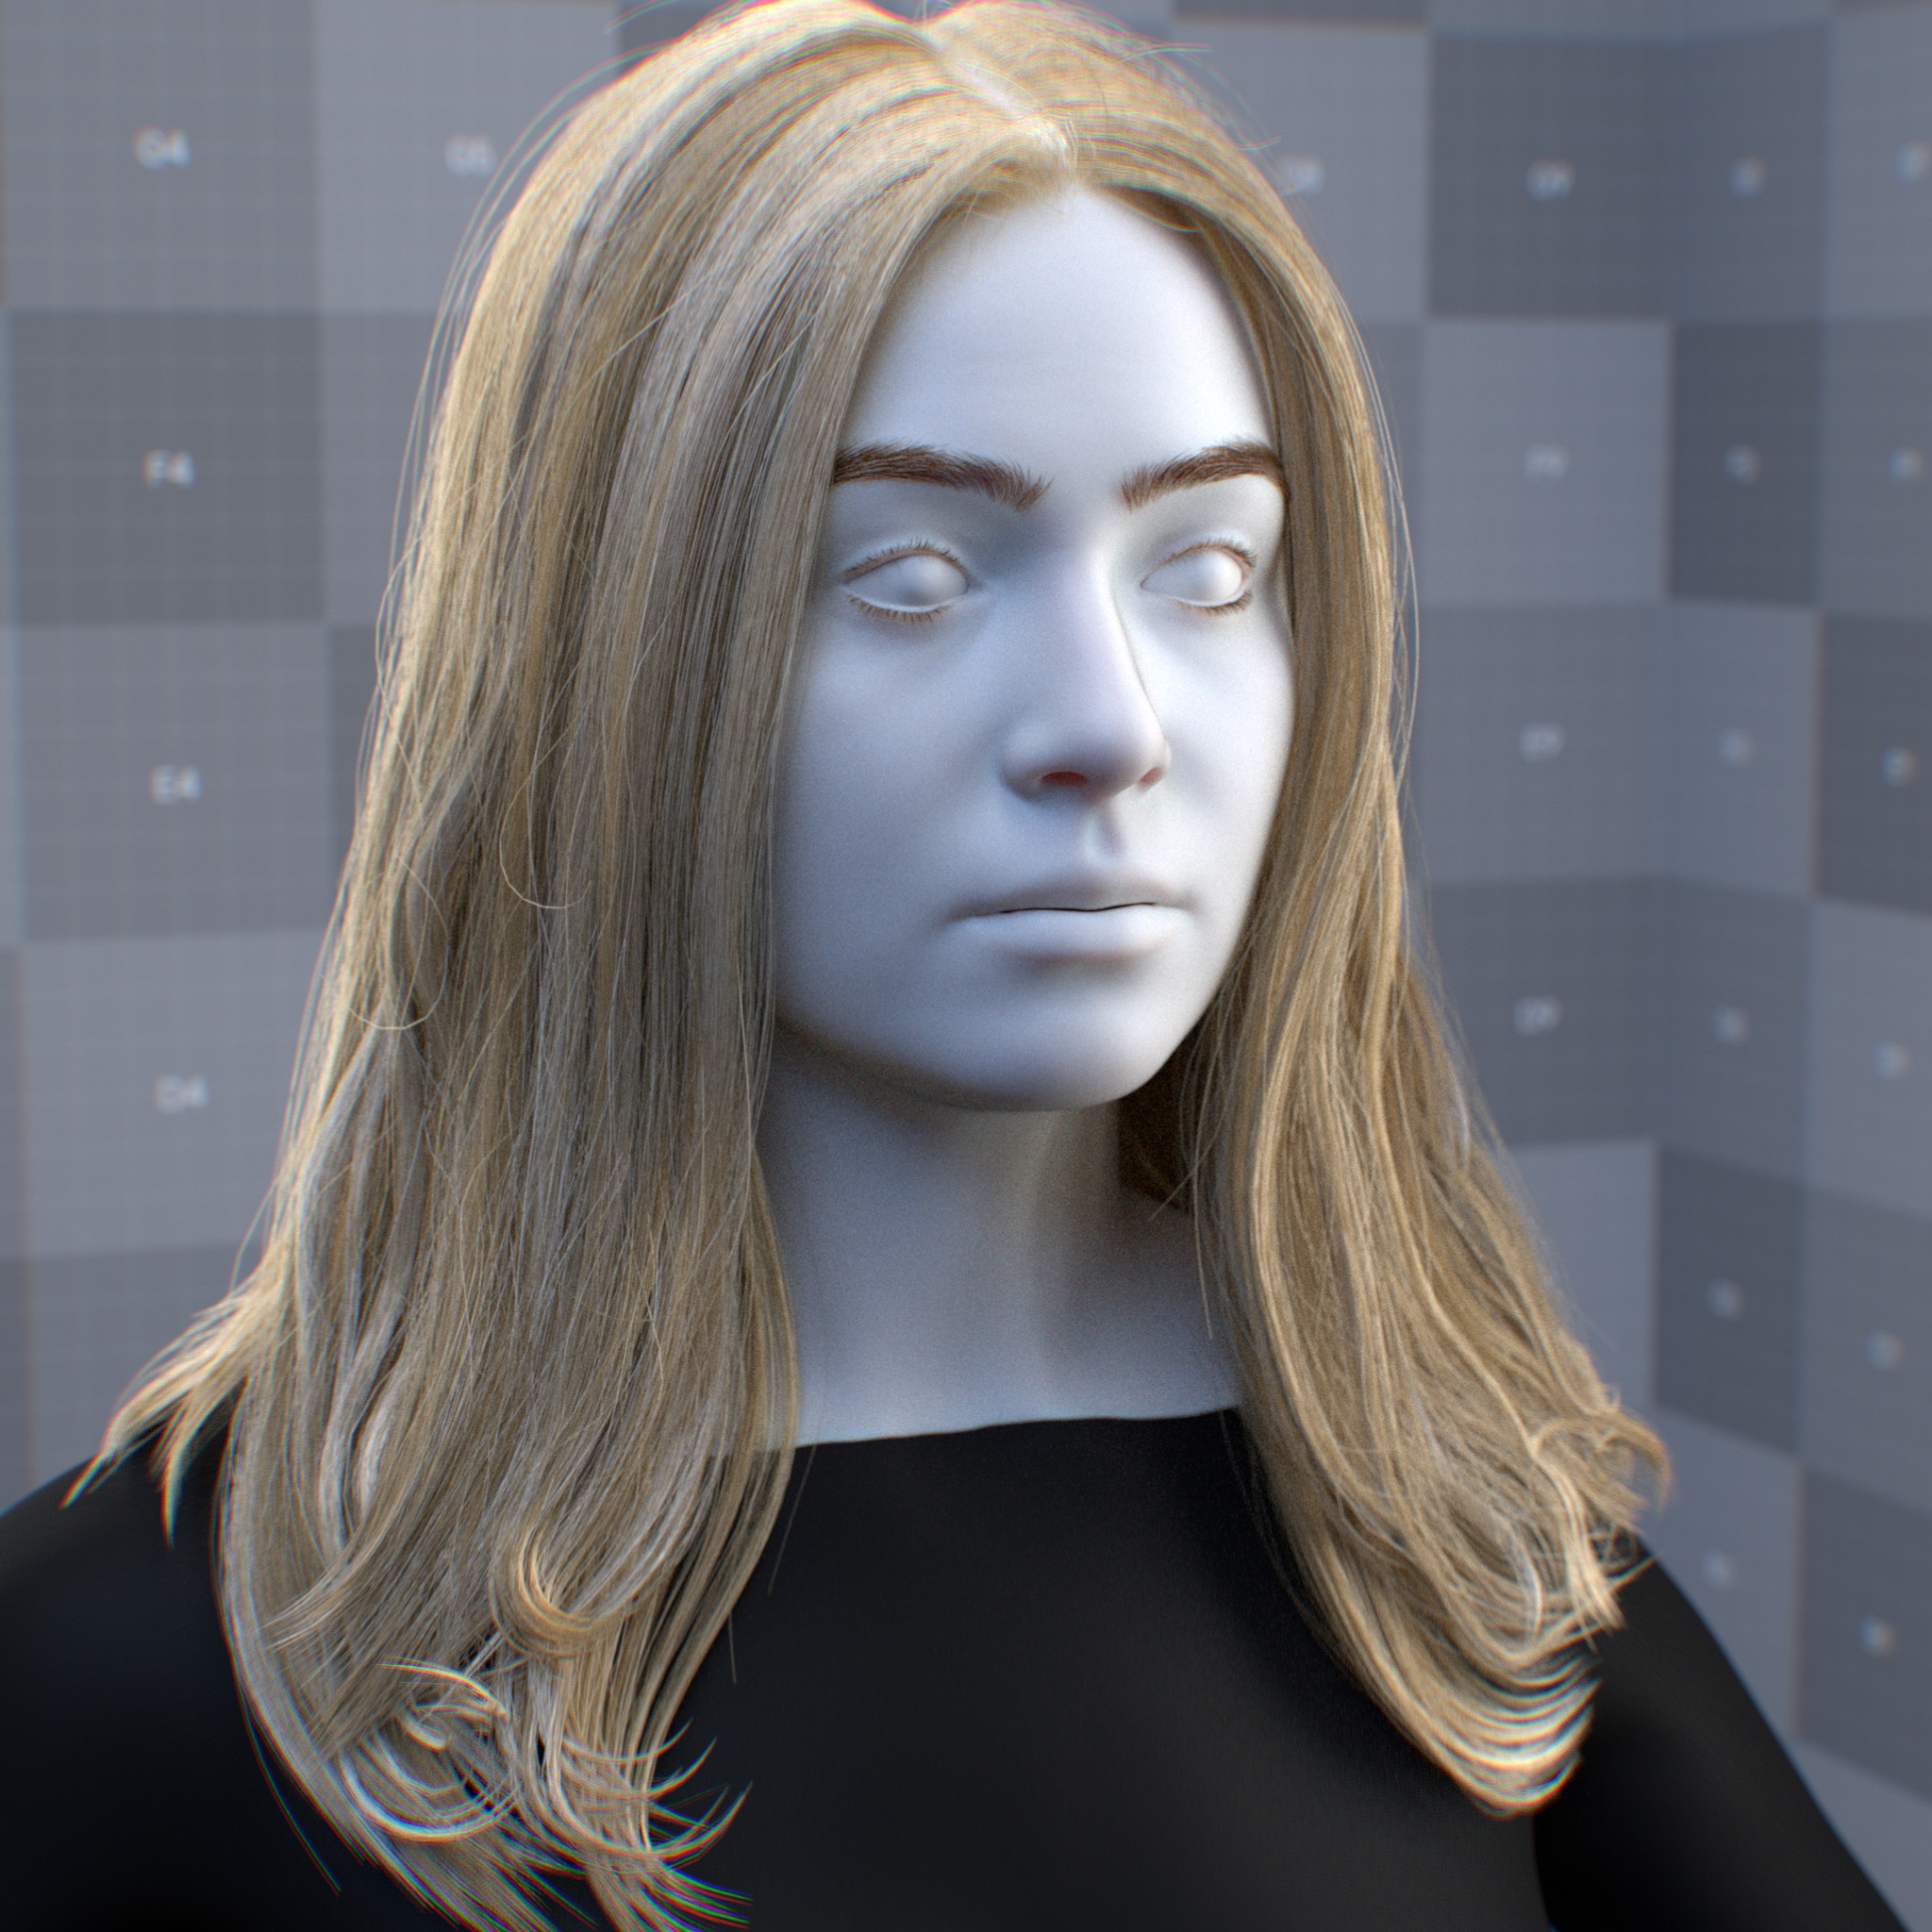 rtx_material_omnihairbase_specular_reflection_azimuthal_roughness_w0p5